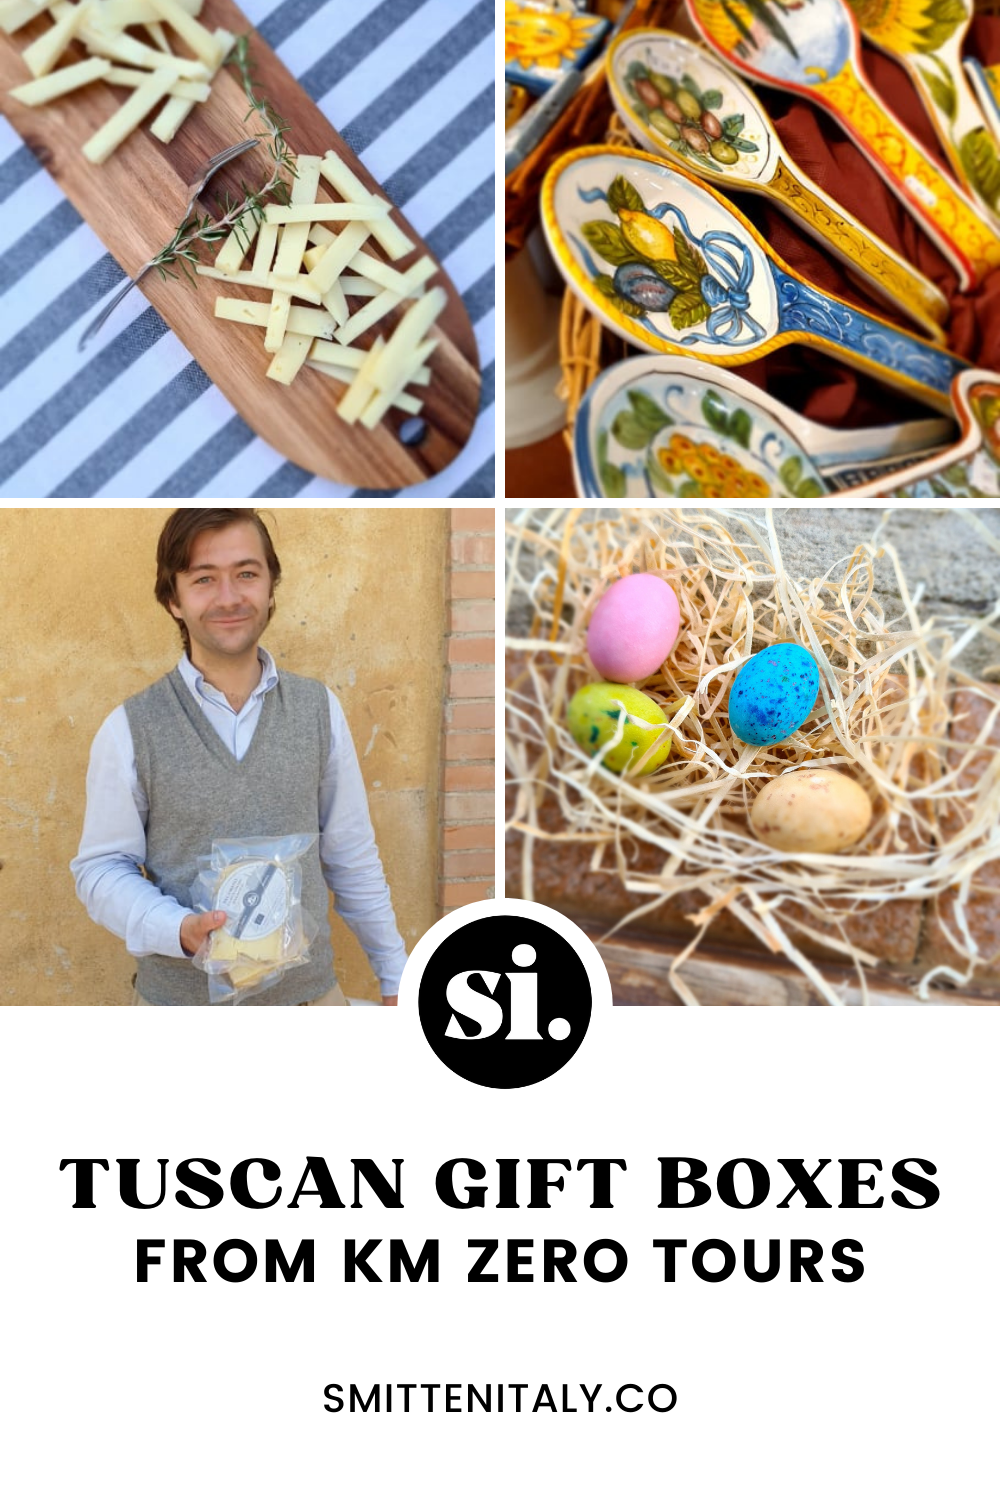 My experience: KM Zero Gourmet Gift Boxes from Tuscany 25